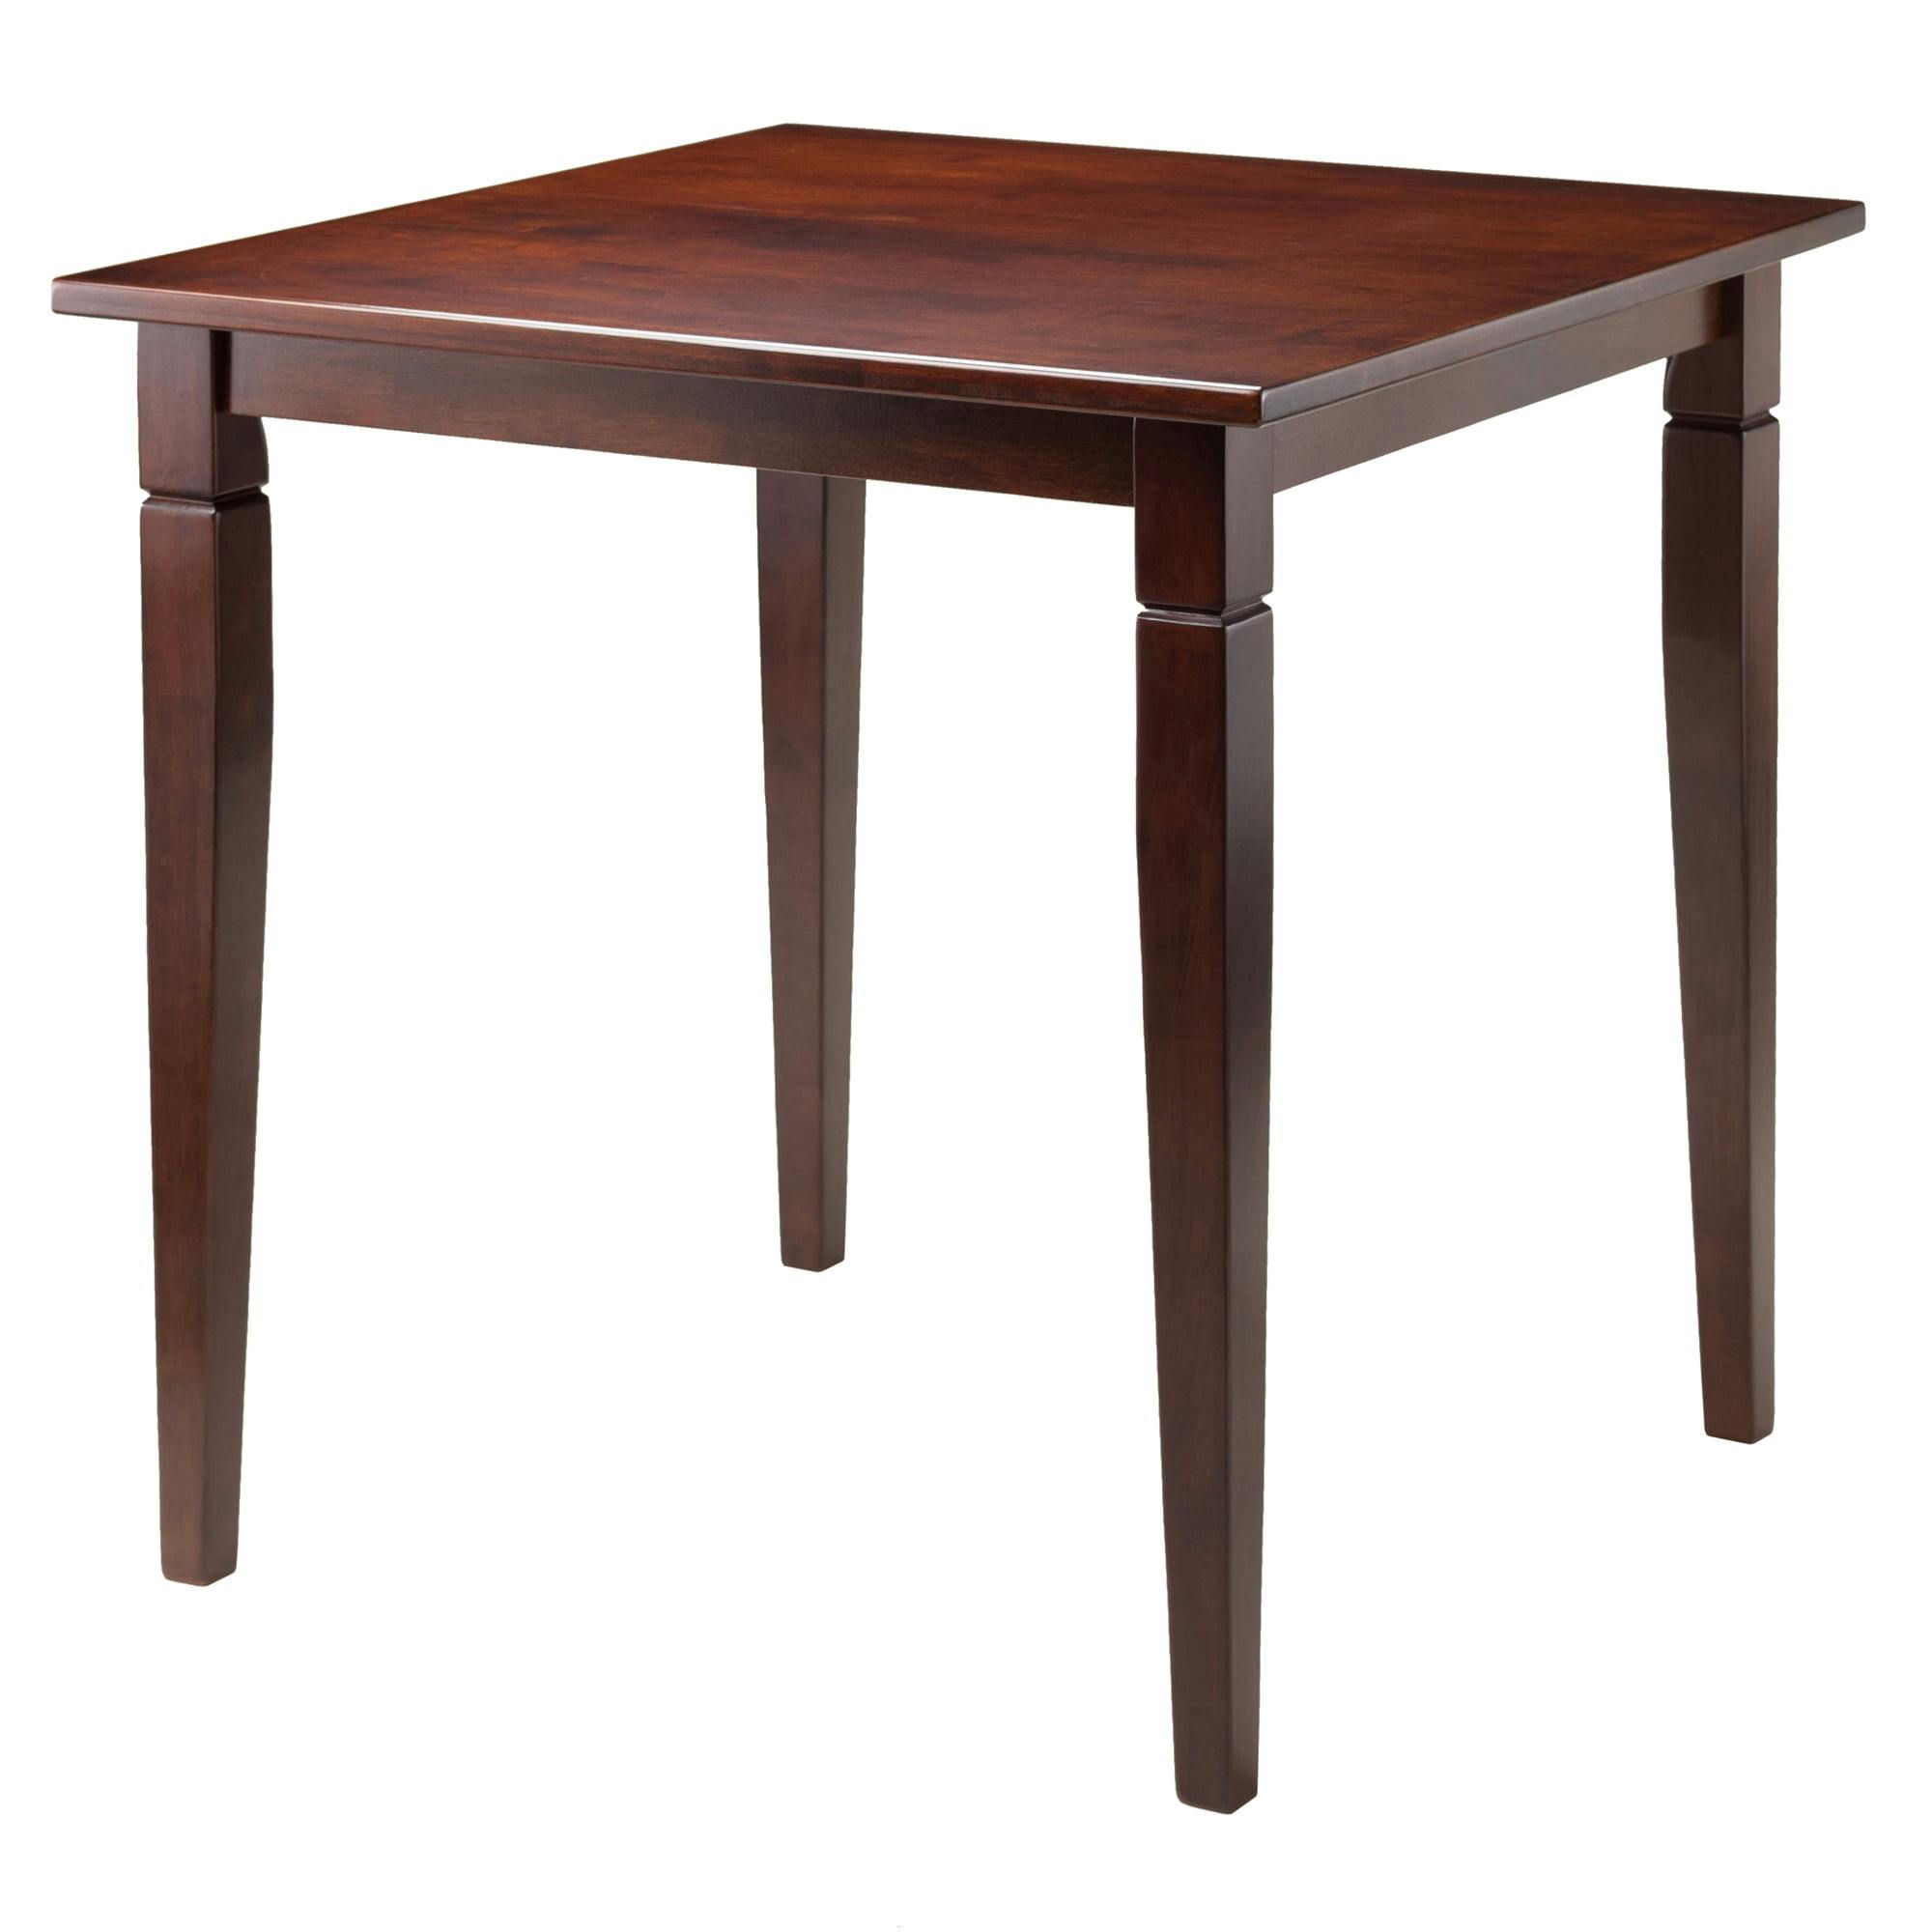 Compact 29'' Square Mid-Century Modern Walnut Dining Table